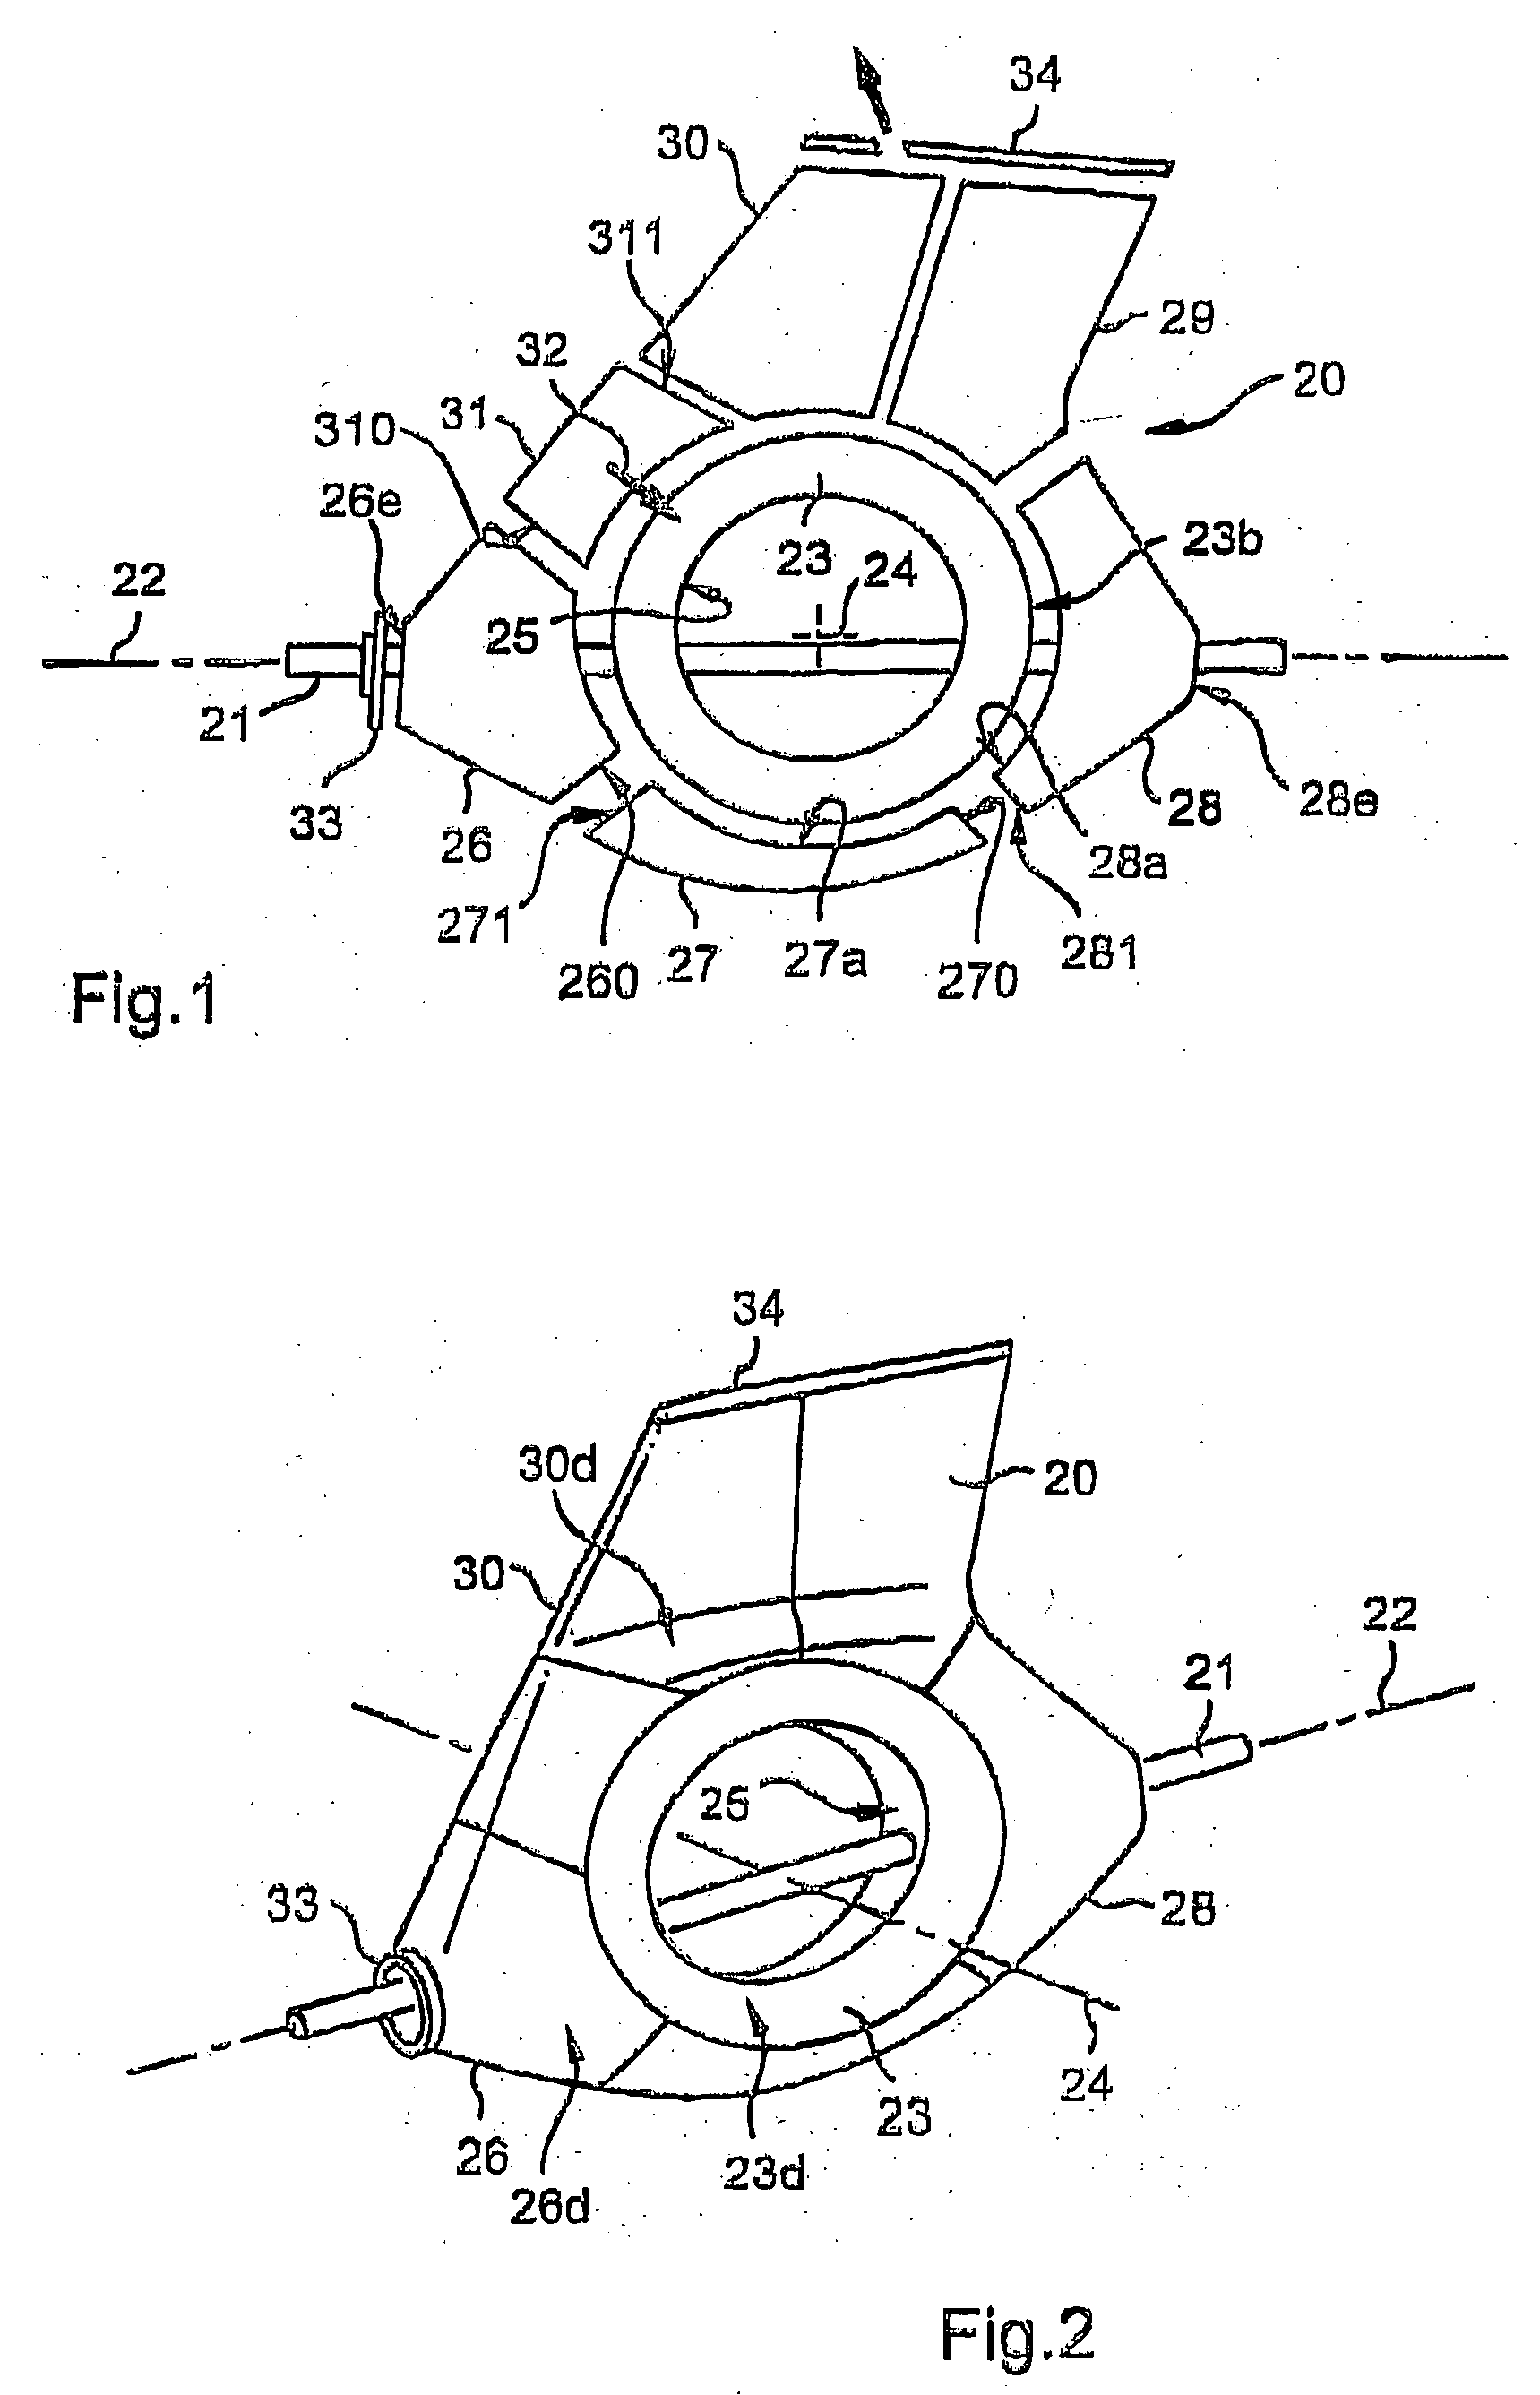 Method and apparatus for manufacturing a helicopter rotor fairing, and a fairing obtained thereby